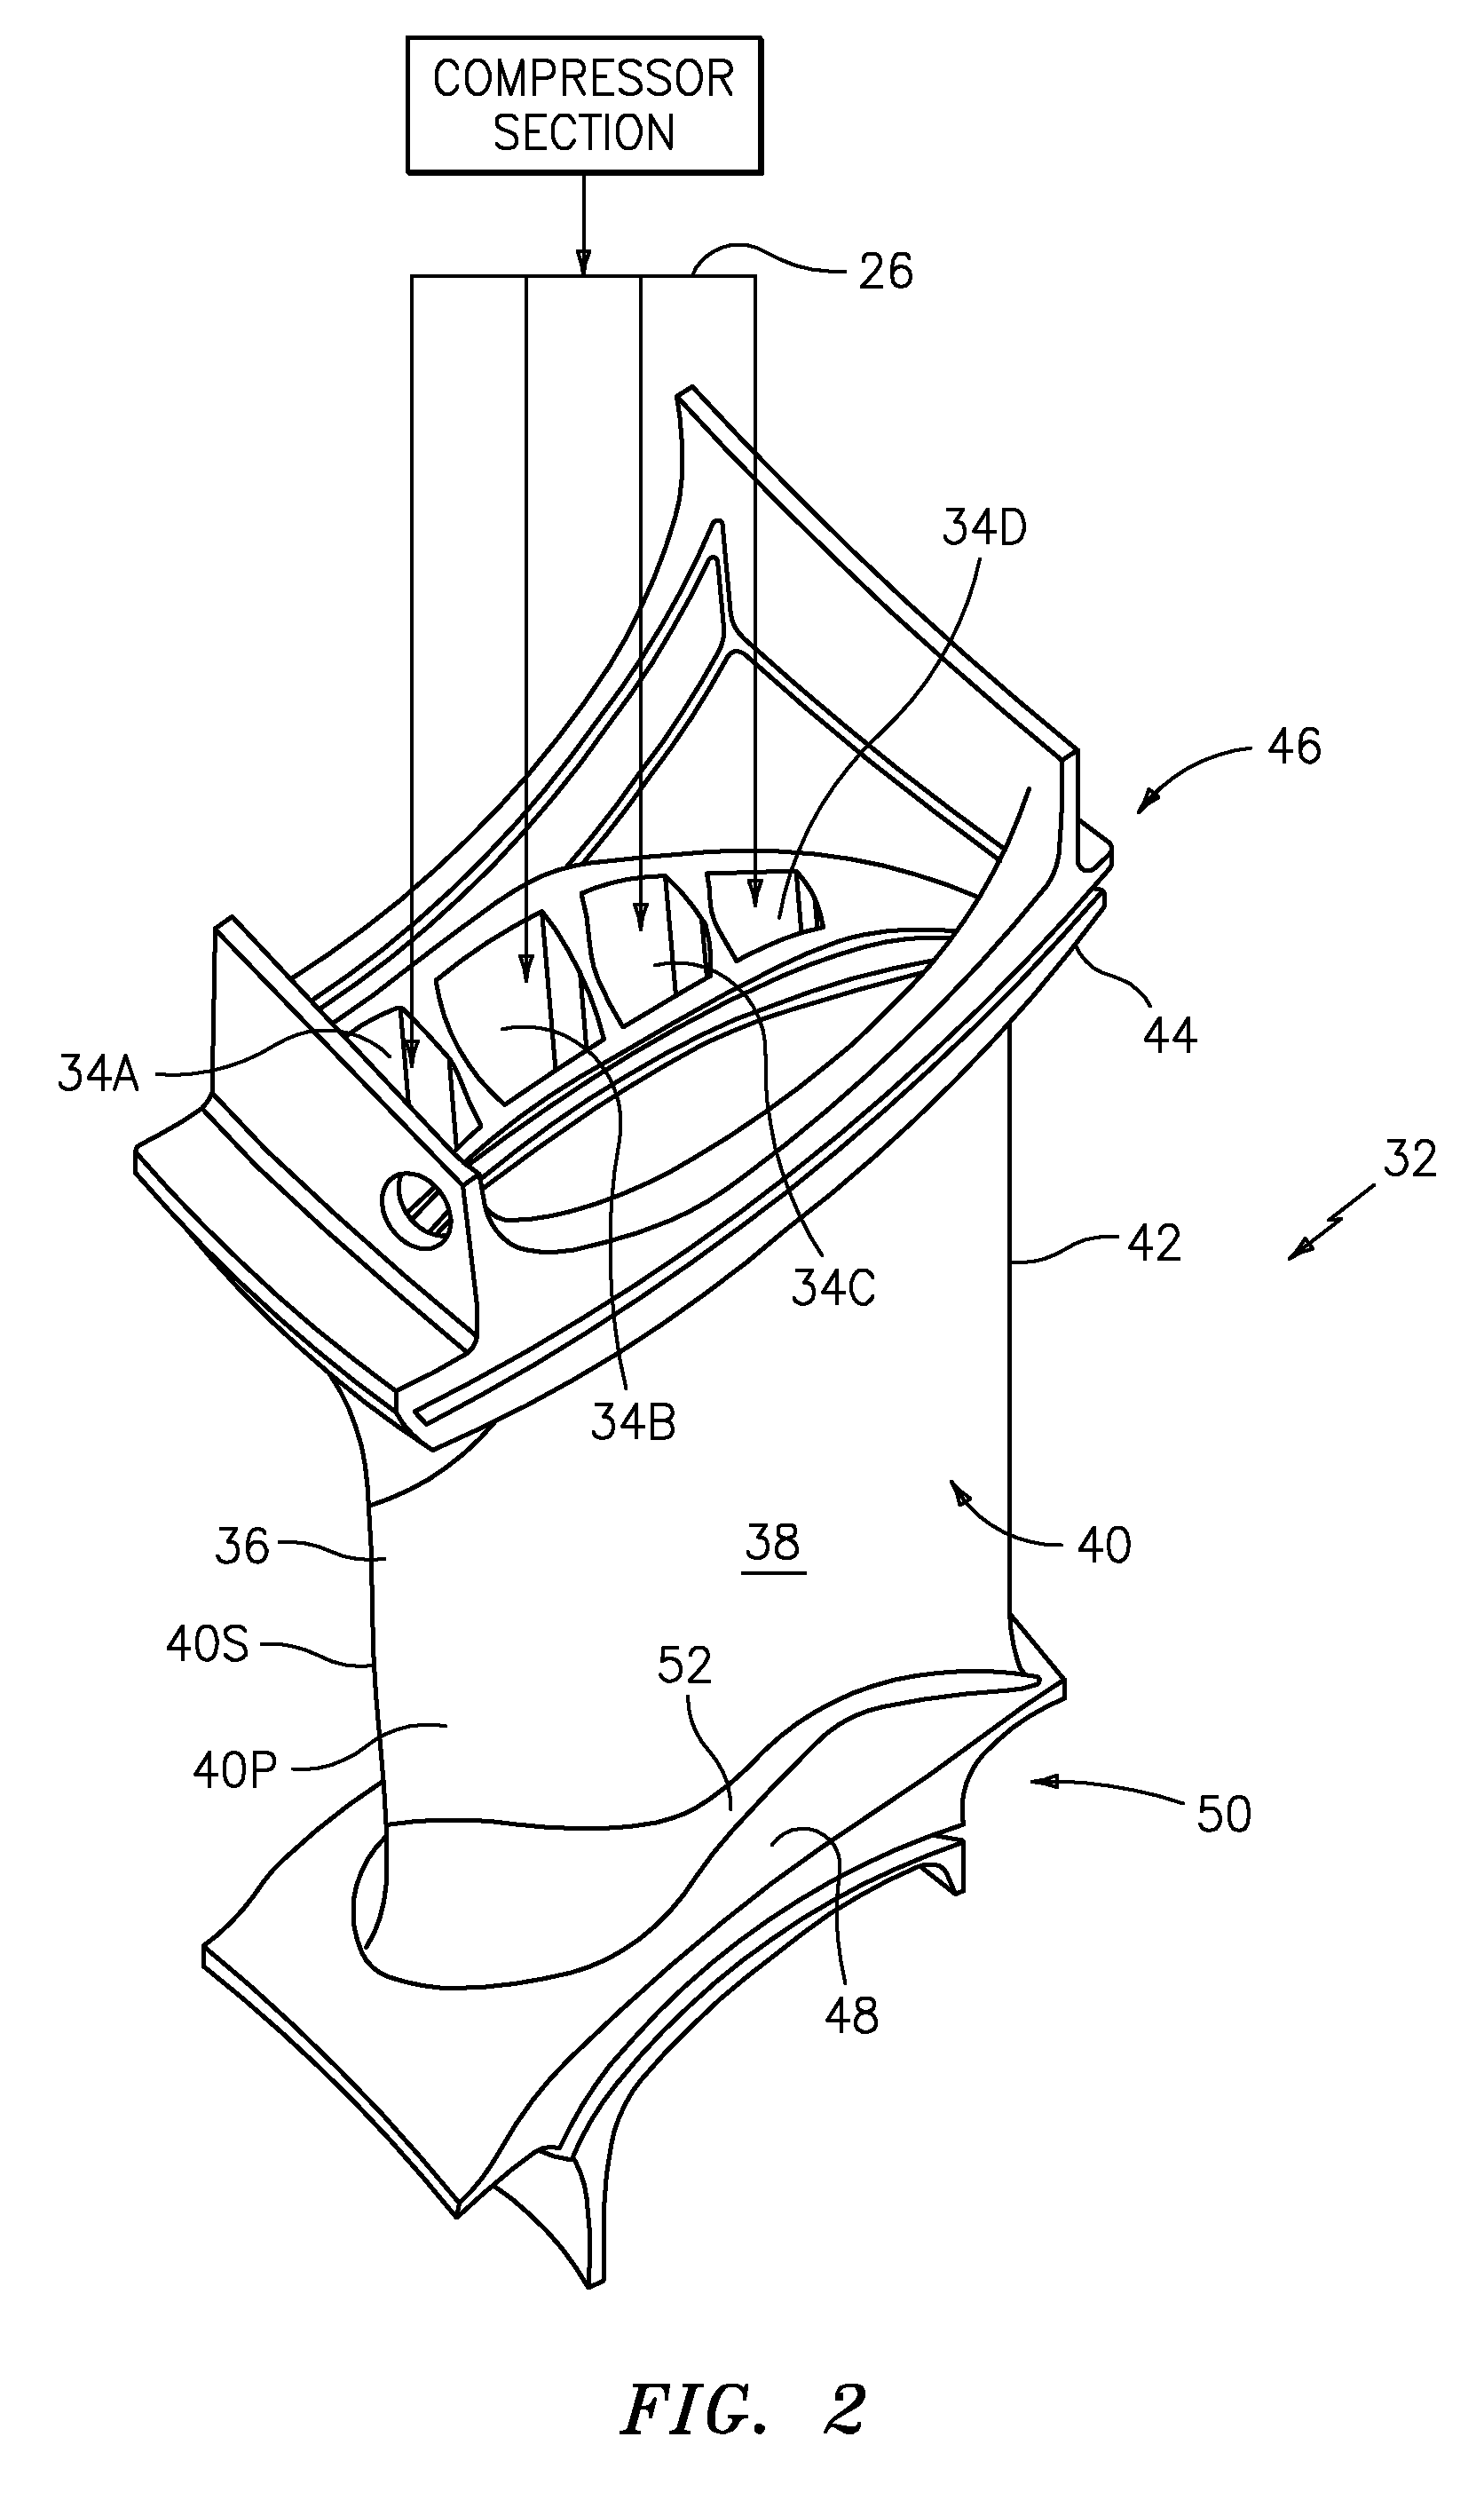 Cooling circuit flow path for a turbine section airfoil